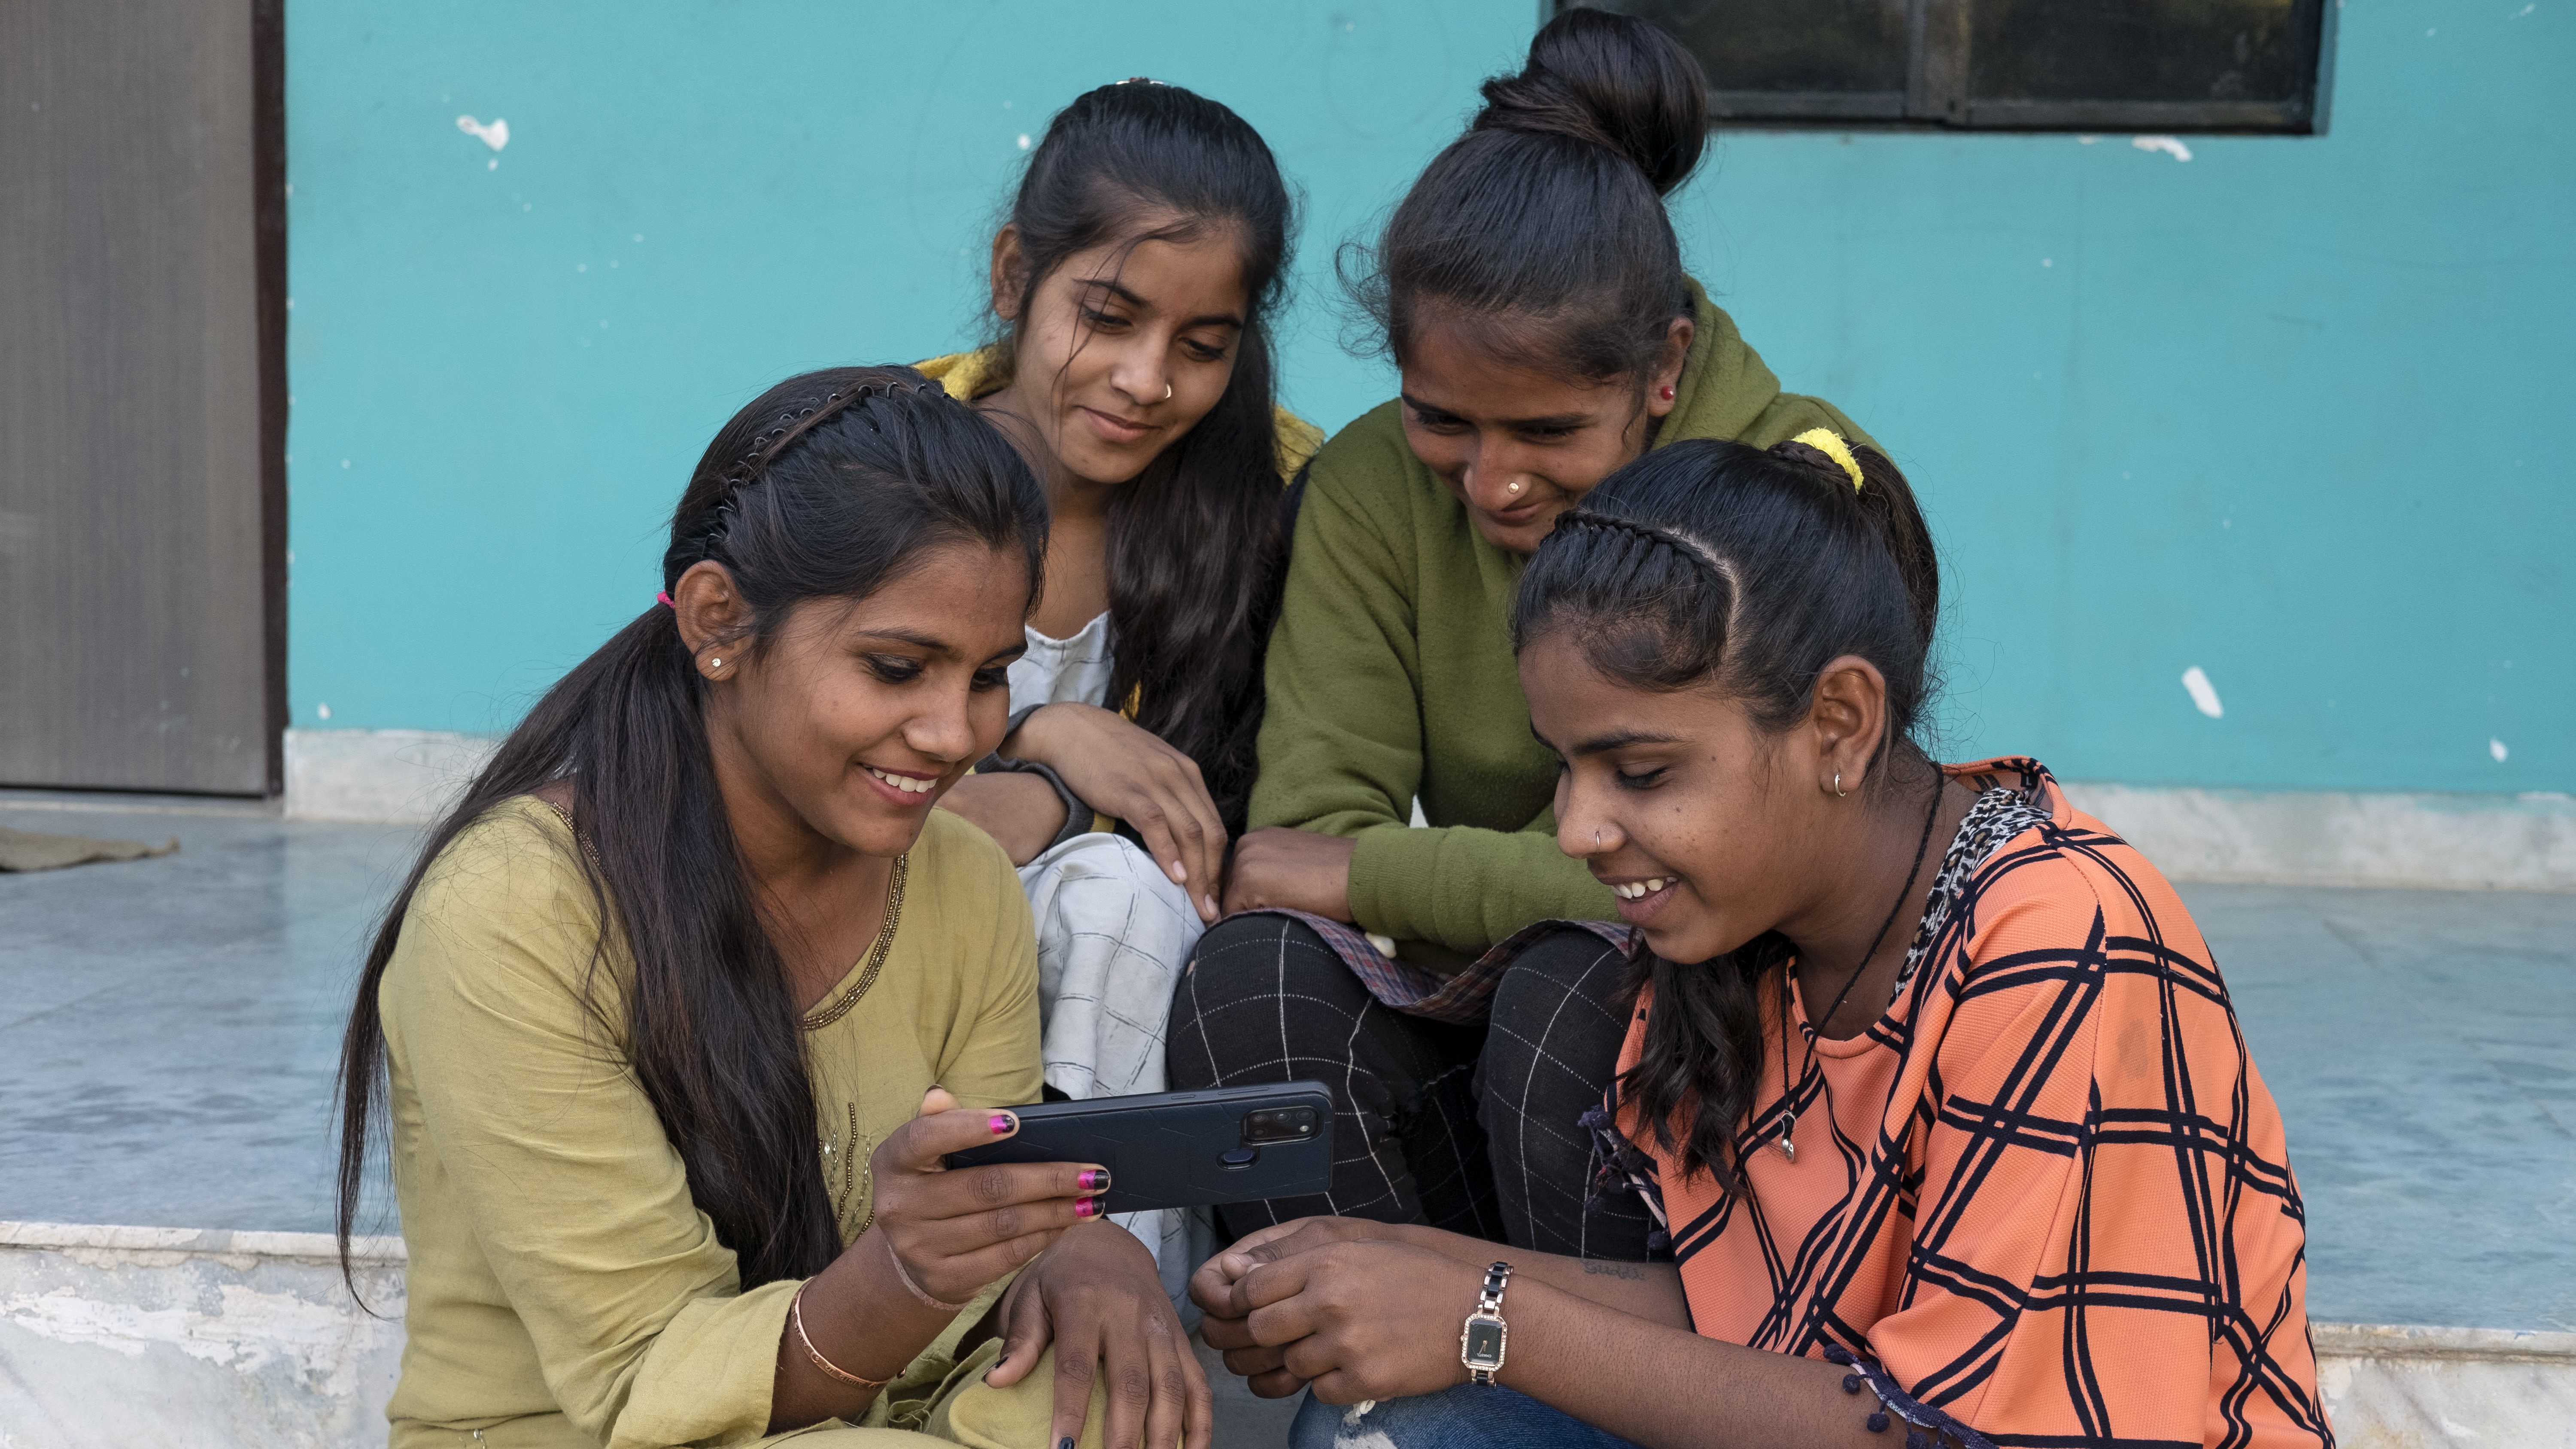 Group of adolescent girls seated on steps look at mobile phone screen.